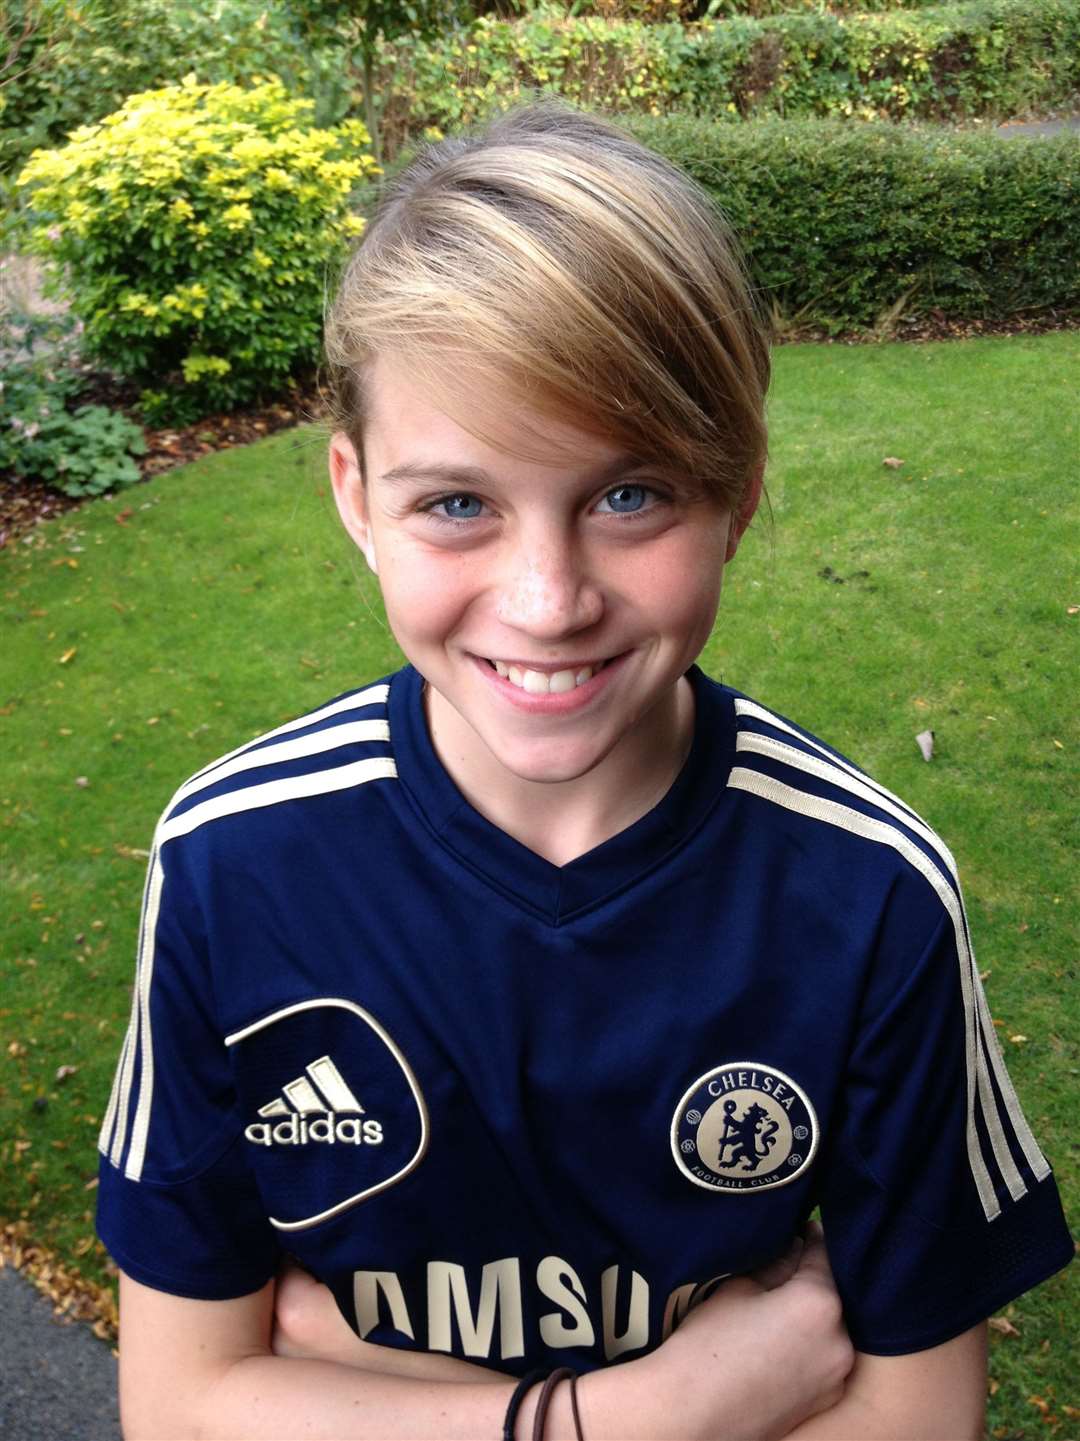 Alessia Russo joined Chelsea from Charlton